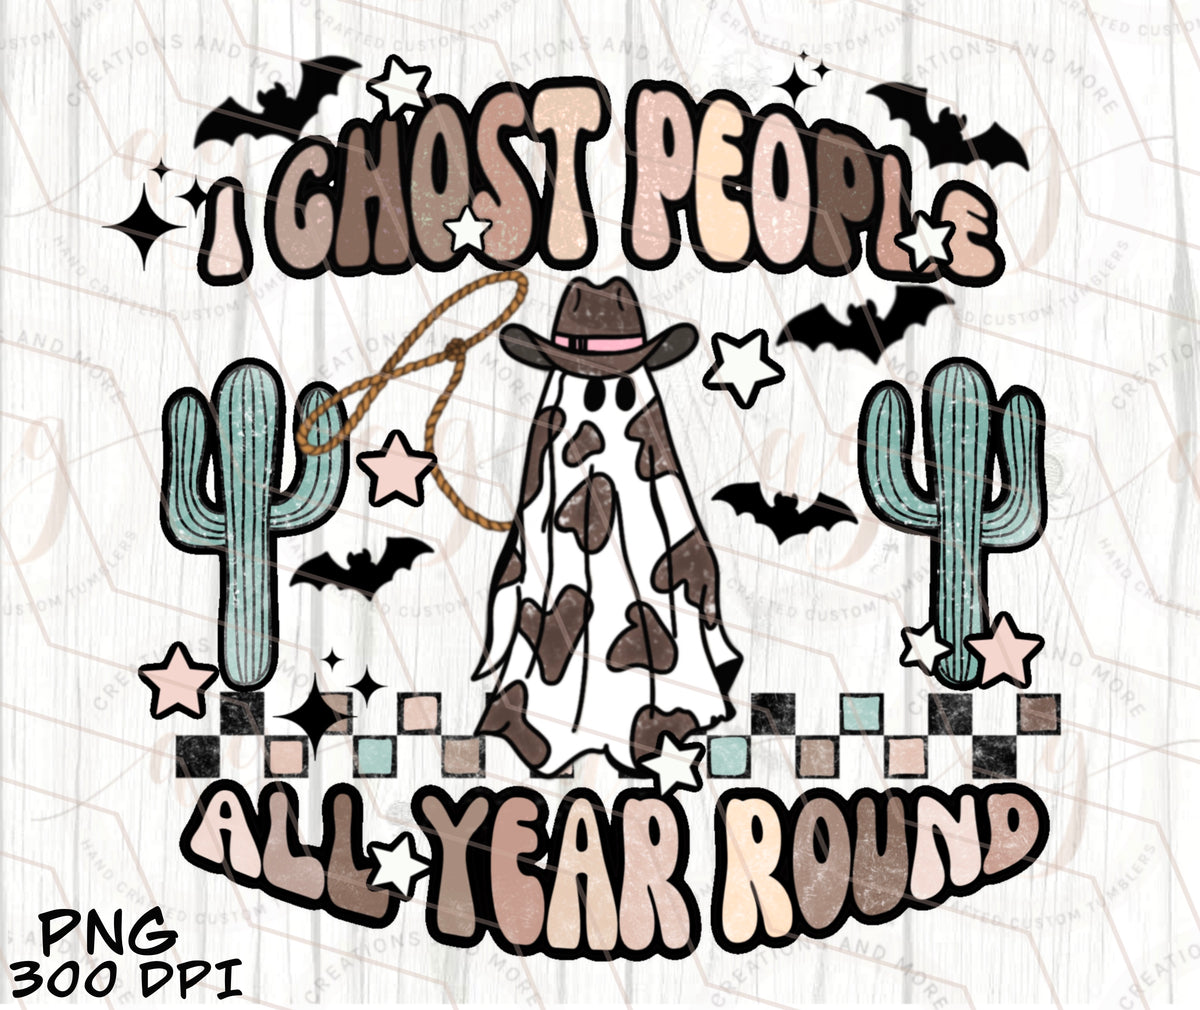 Western Ghost People All Year-Round Png